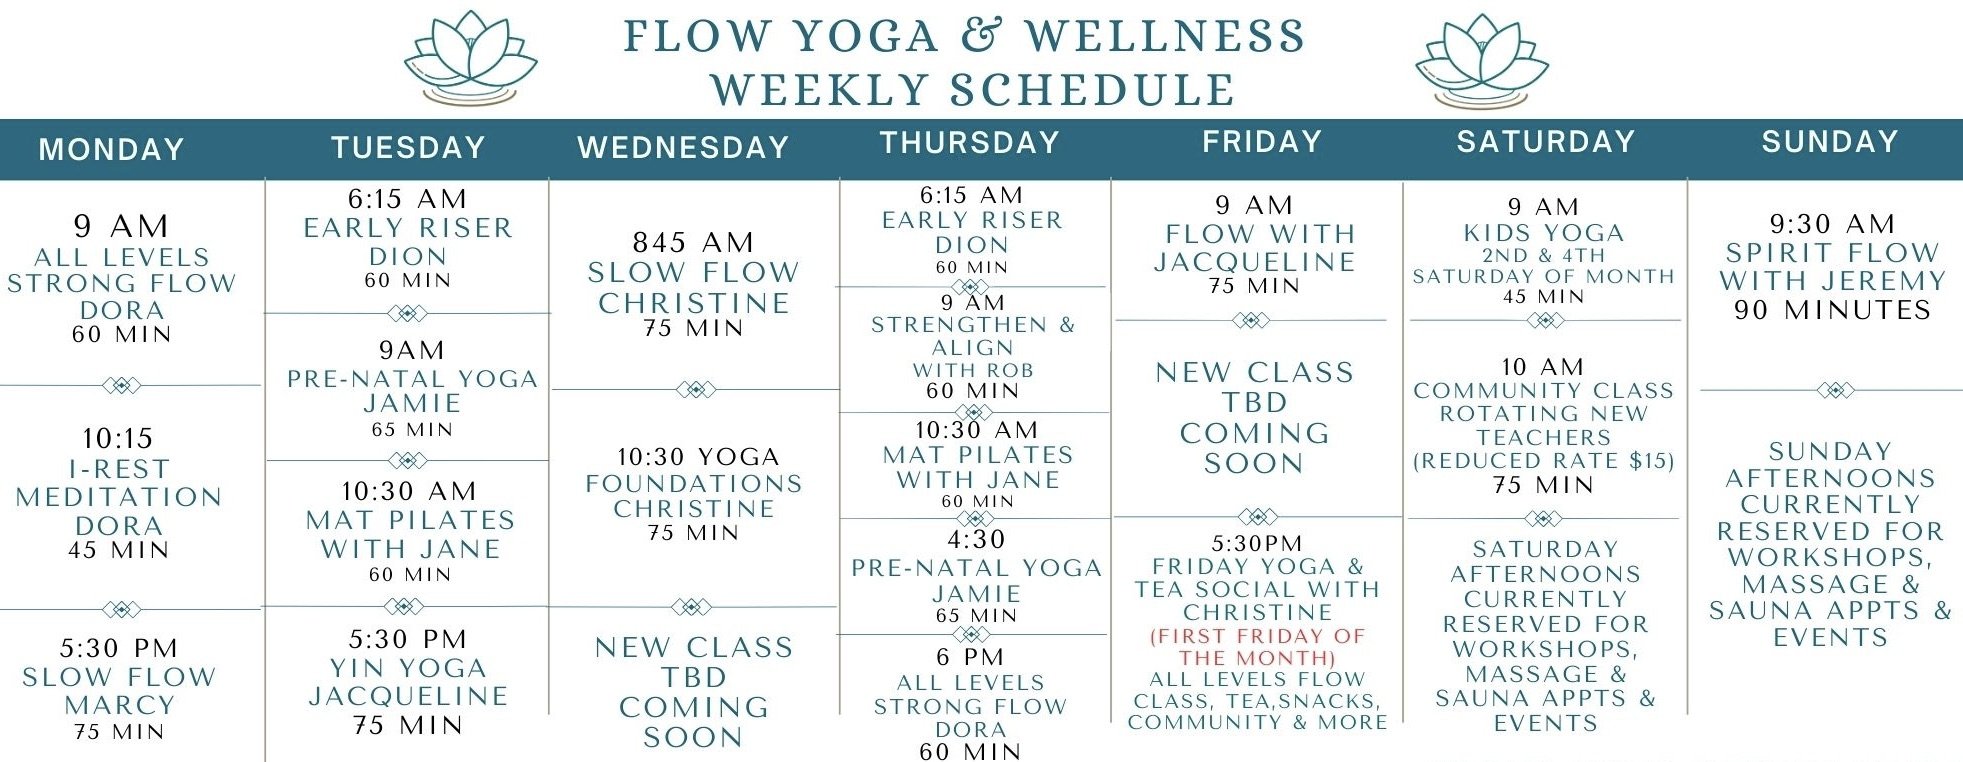 Yoga Classes Schedule - ROOTED HEART YOGA & WELLNESS